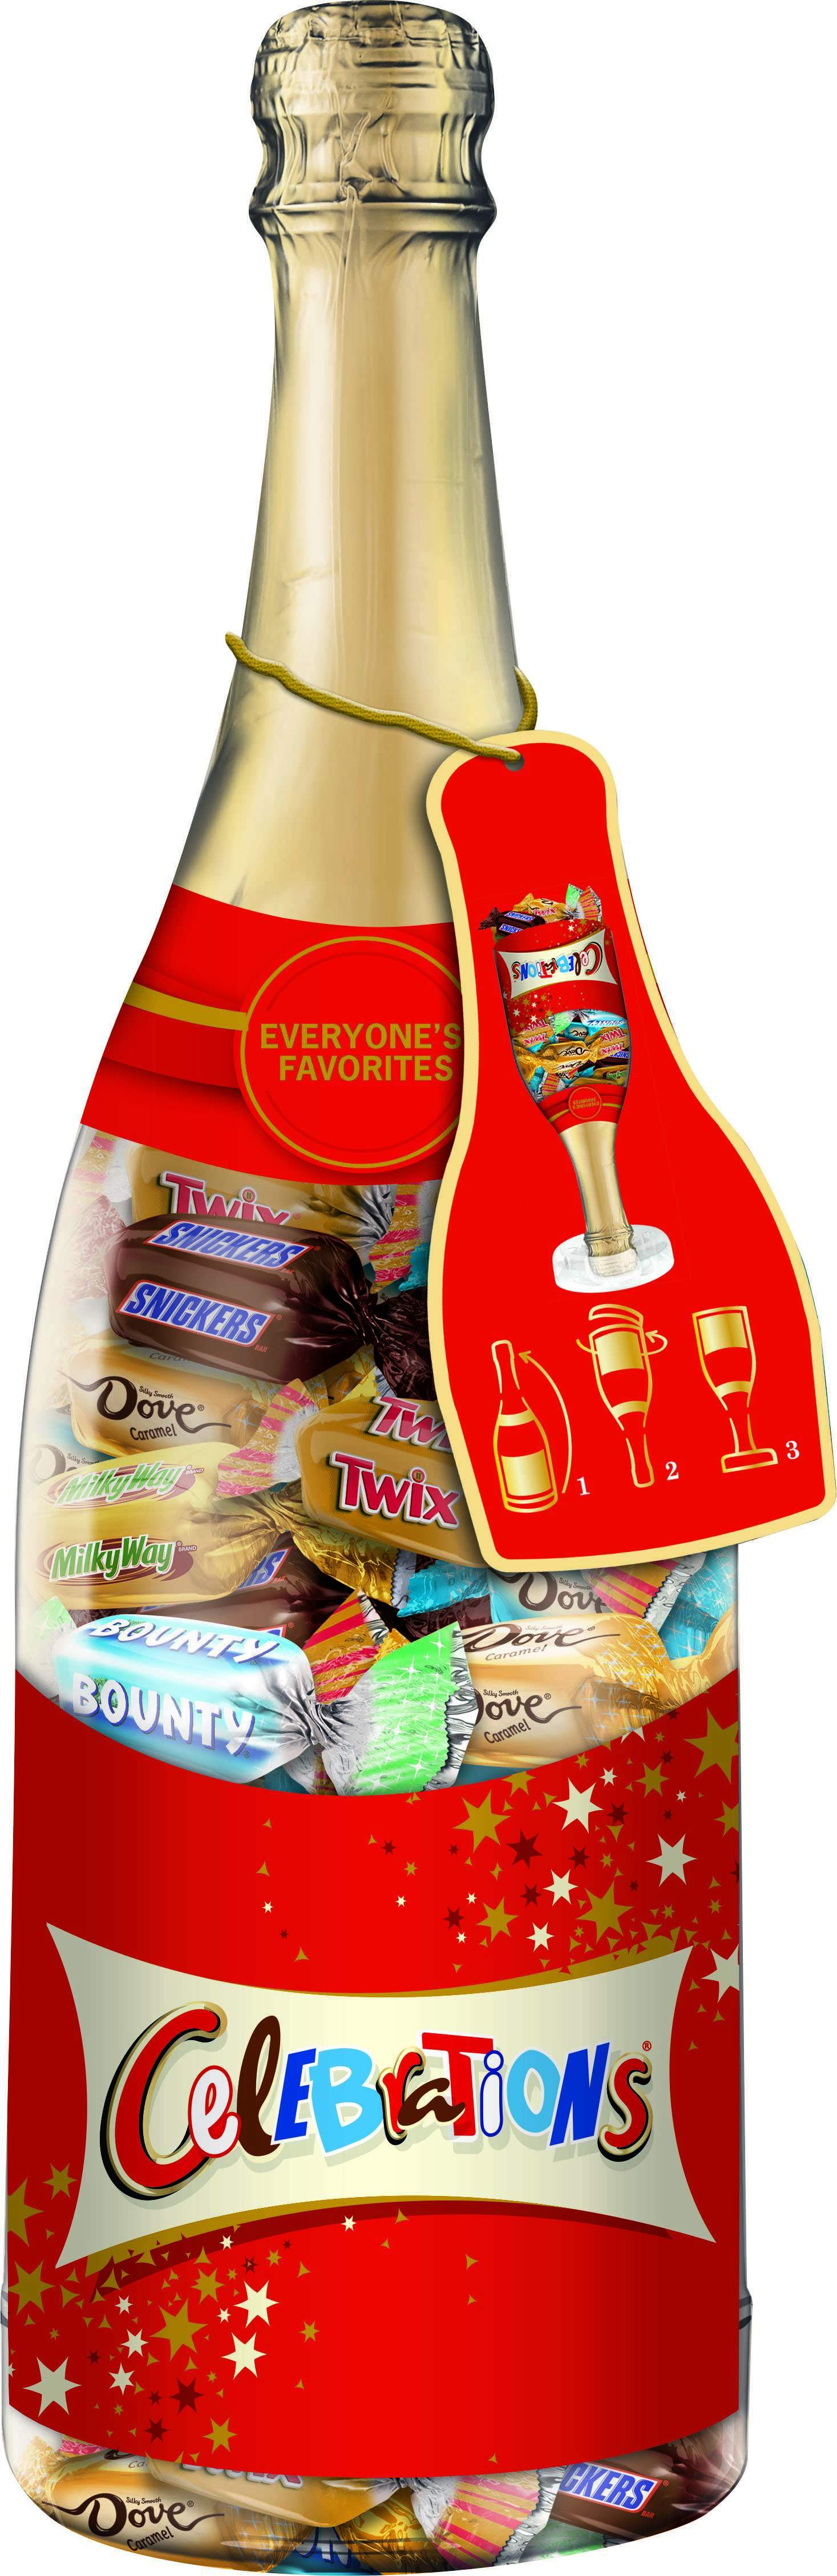 Celebrations Chocolate Candies Meltable Celebrations 21.37 Ounce 